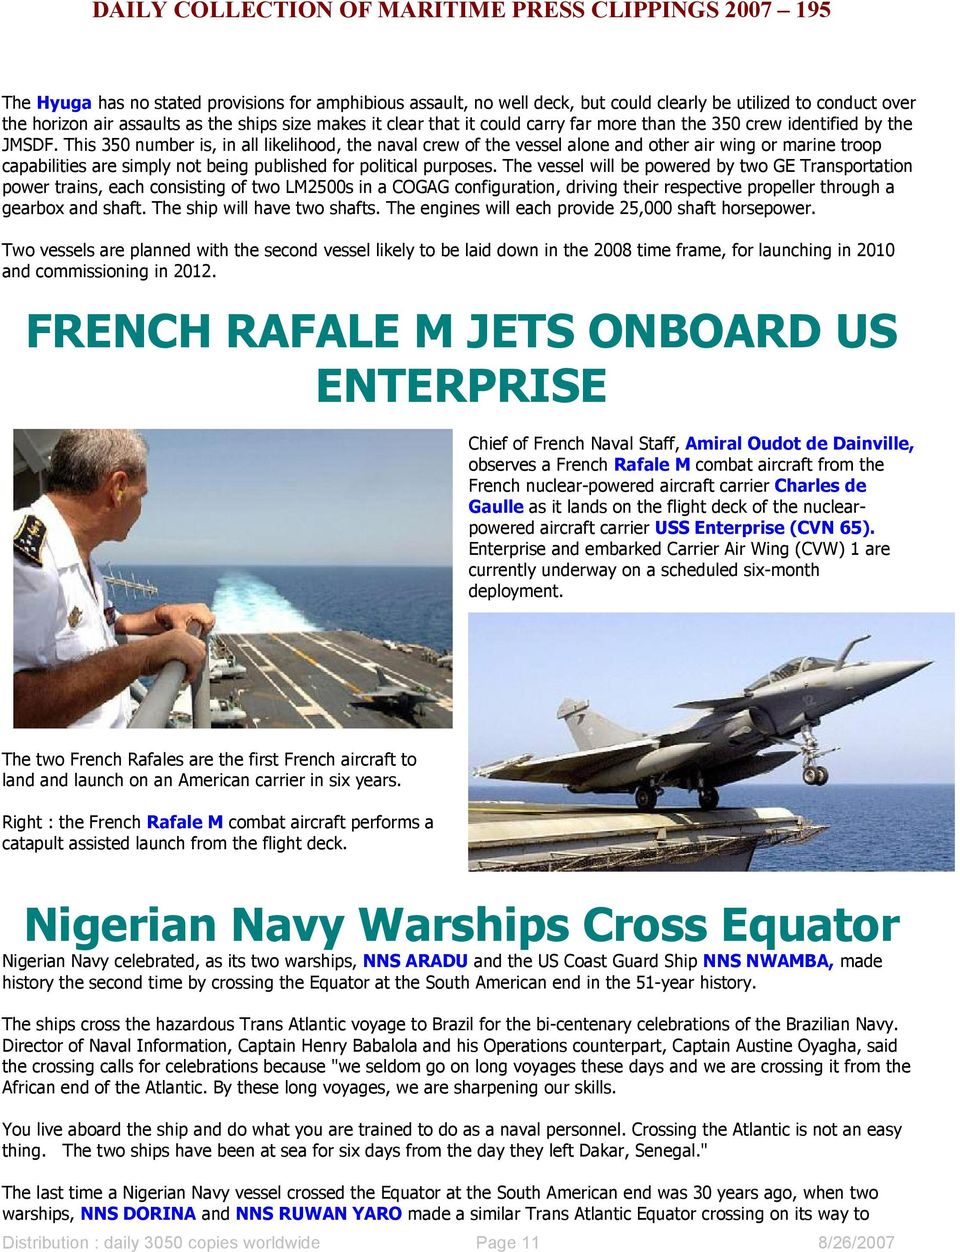 This 350 number is, in all likelihood, the naval crew of the vessel alone and other air wing or marine troop capabilities are simply not being published for political purposes.